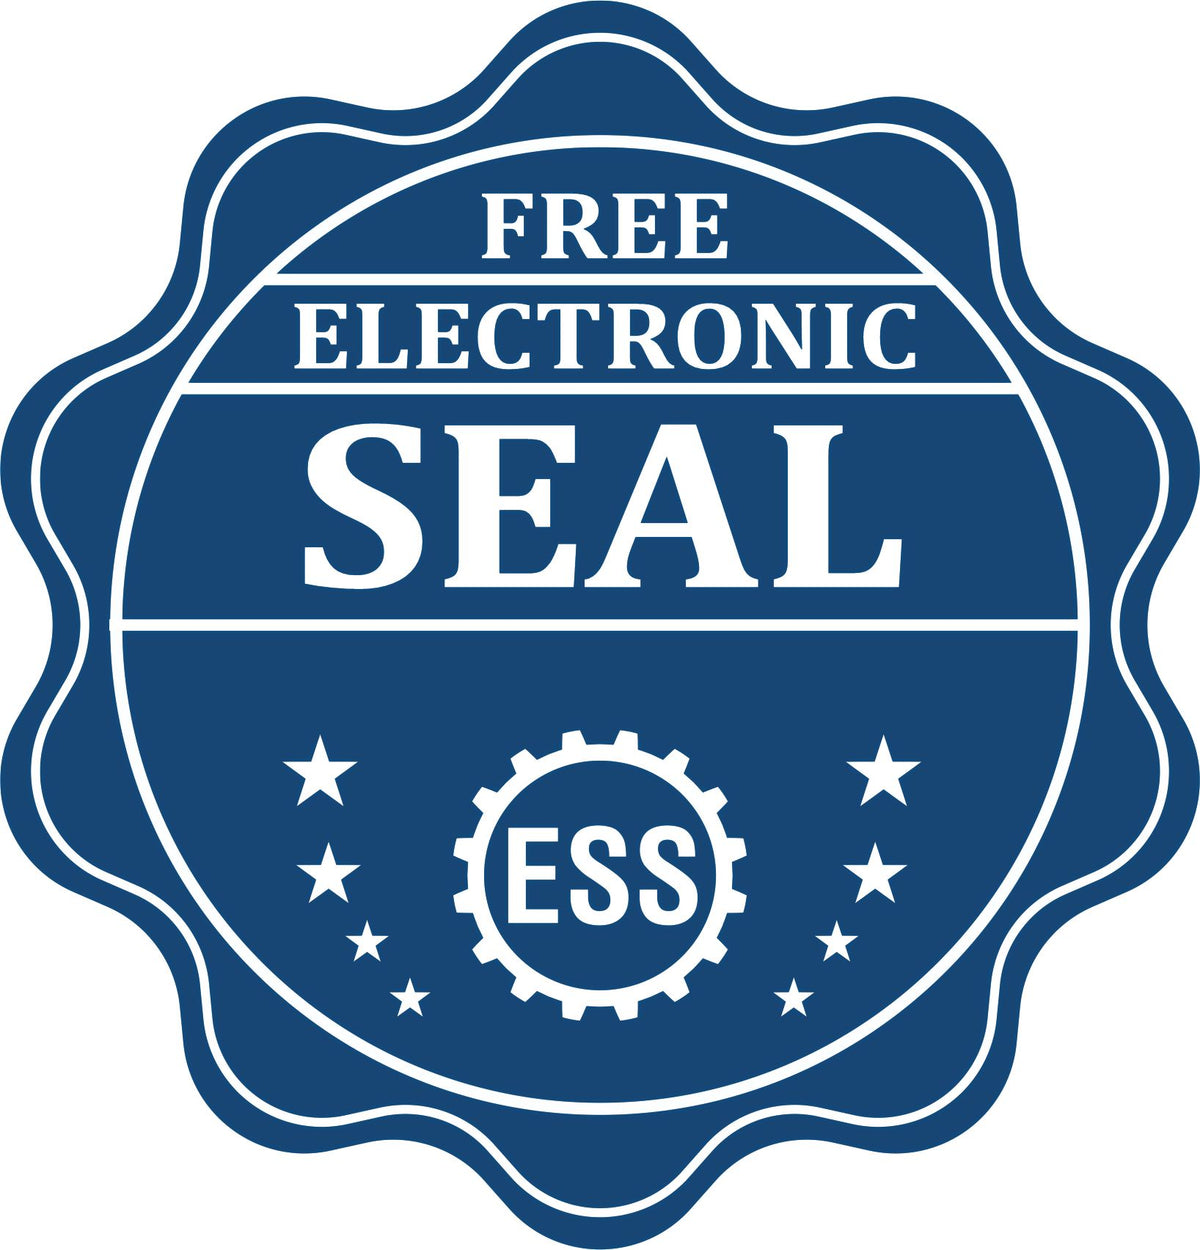 A badge showing a free electronic seal for the Hybrid New Jersey Land Surveyor Seal with stars and the ESS gear on the emblem.